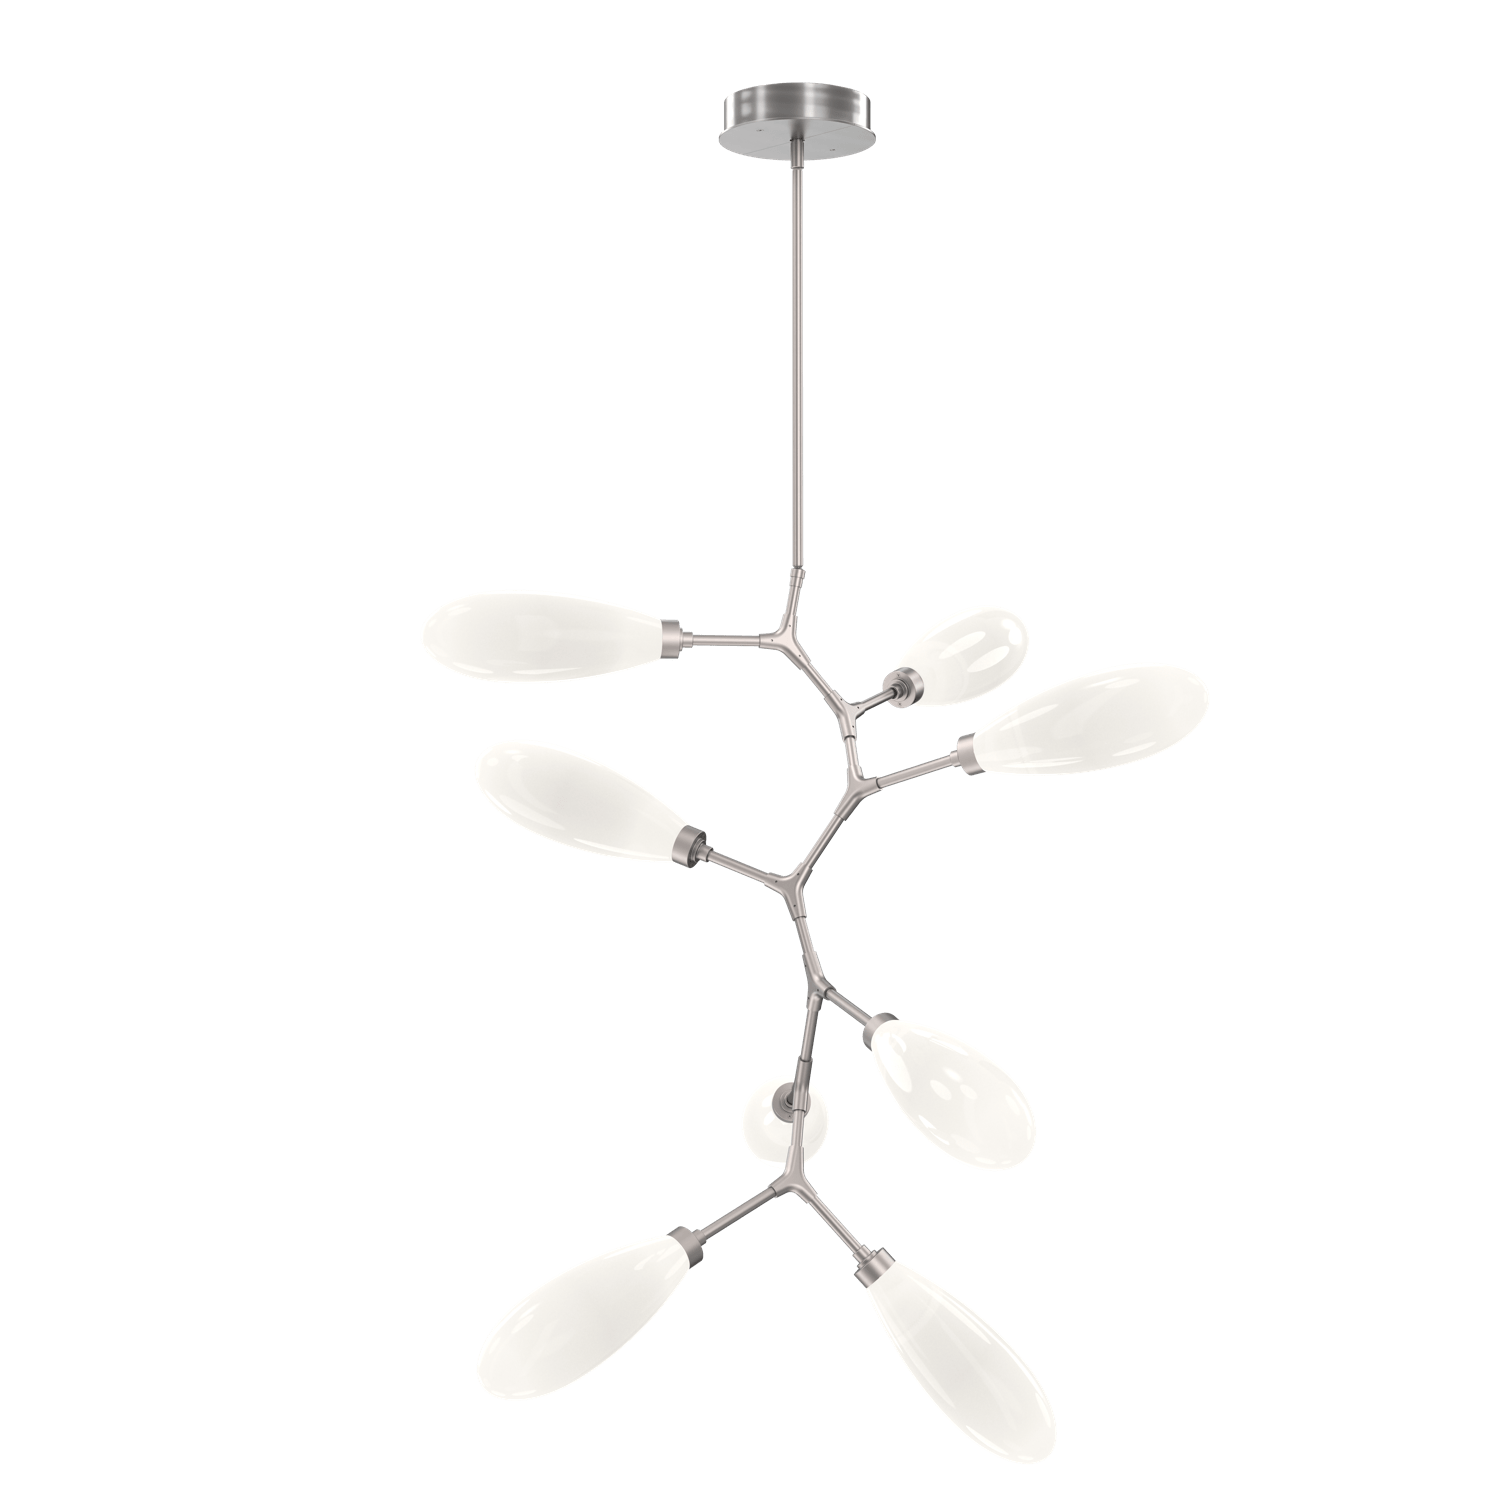 CHB0071-VB-SN-WL-LL-Hammerton-Studio-Fiori-8-light-organic-vine-chandelier-with-satin-nickel-finish-and-opal-white-glass-shades-and-LED-lamping